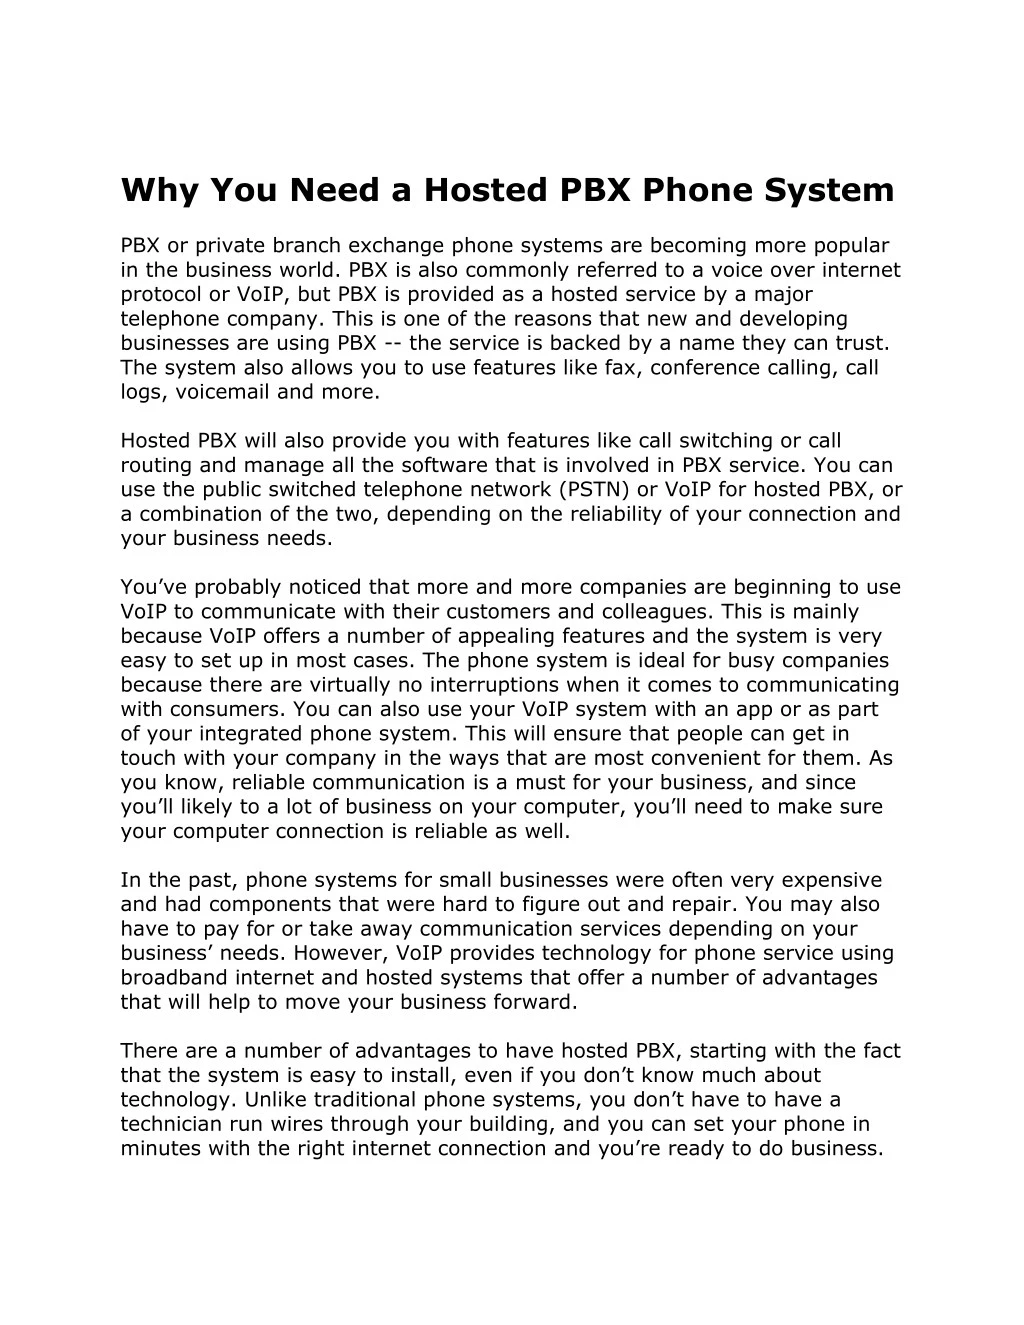 why you need a hosted pbx phone system